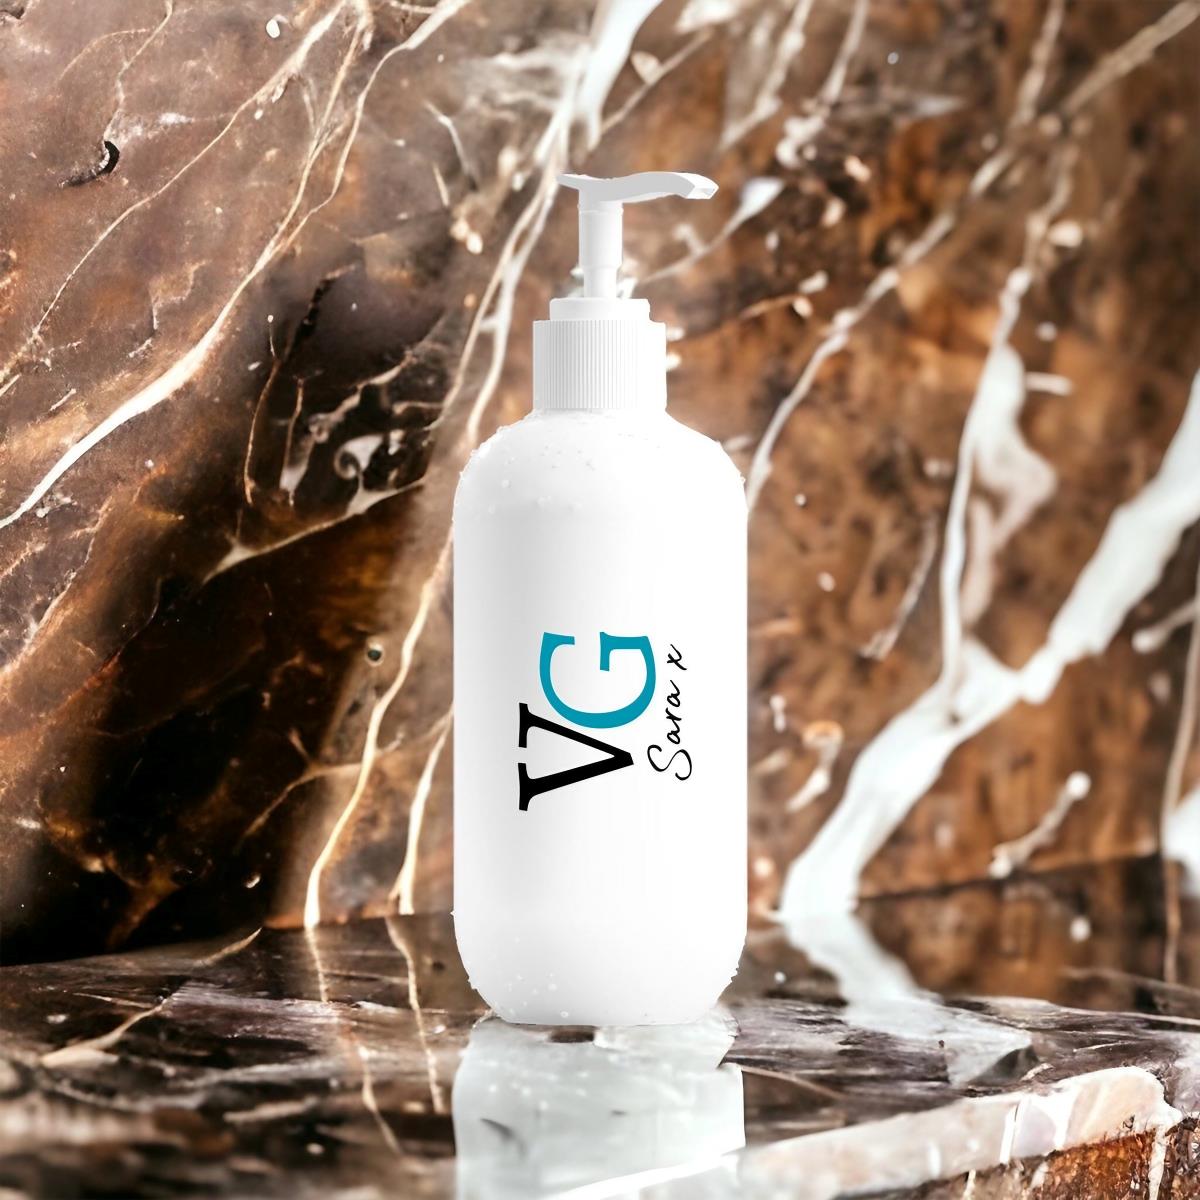 VG Hand & Body Moisturizer Lotion on a marble surface